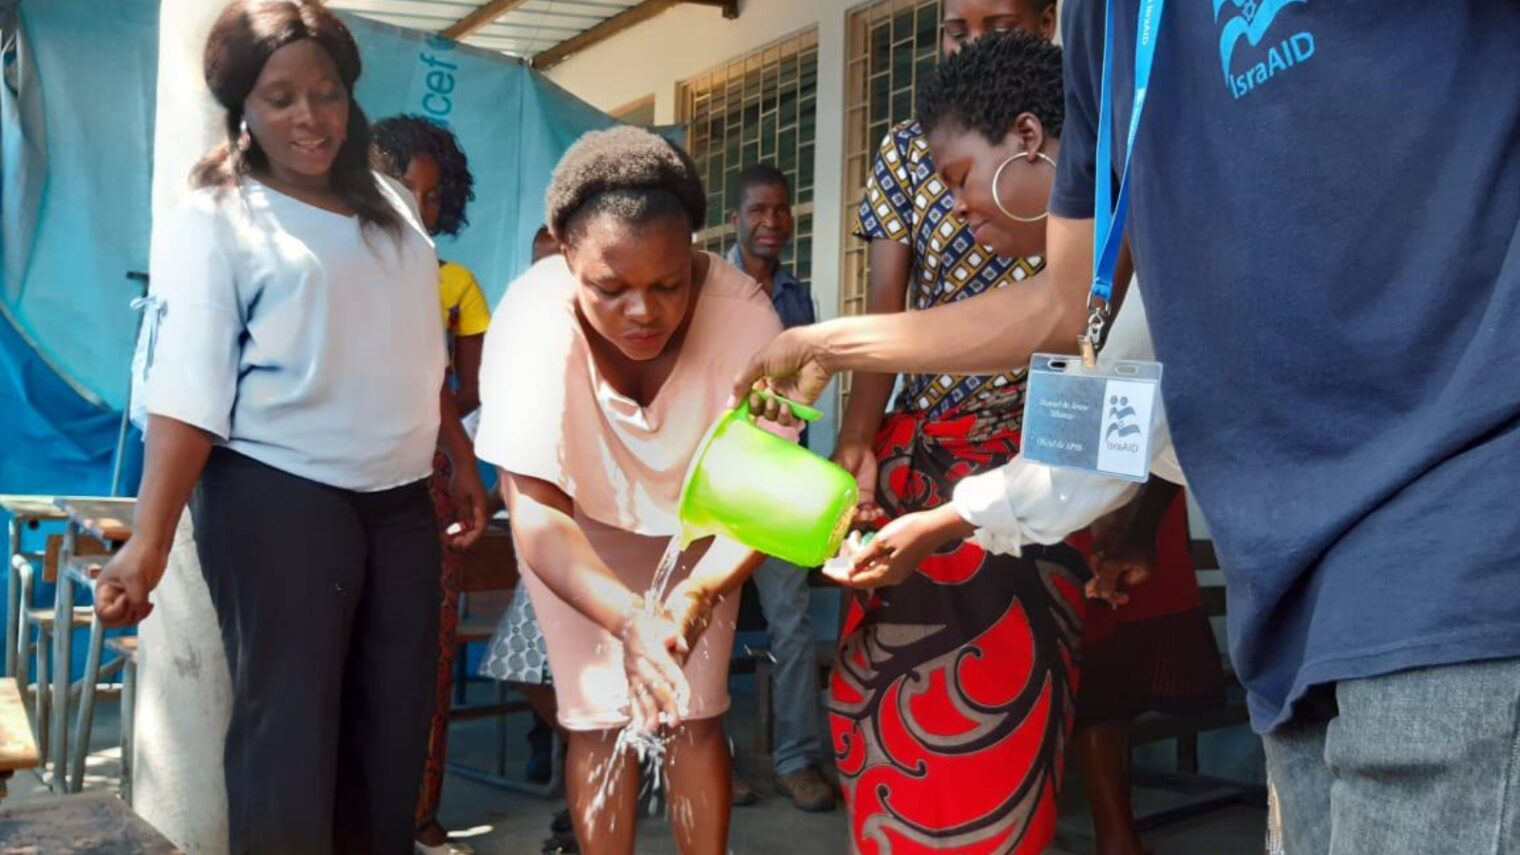 IsraAID Mozambique's team is promoting hygiene and health by bringing soap, buckets and water purification to every training they conduct for teachers as part of its ongoing psychosocial support program. Photo: courtesy